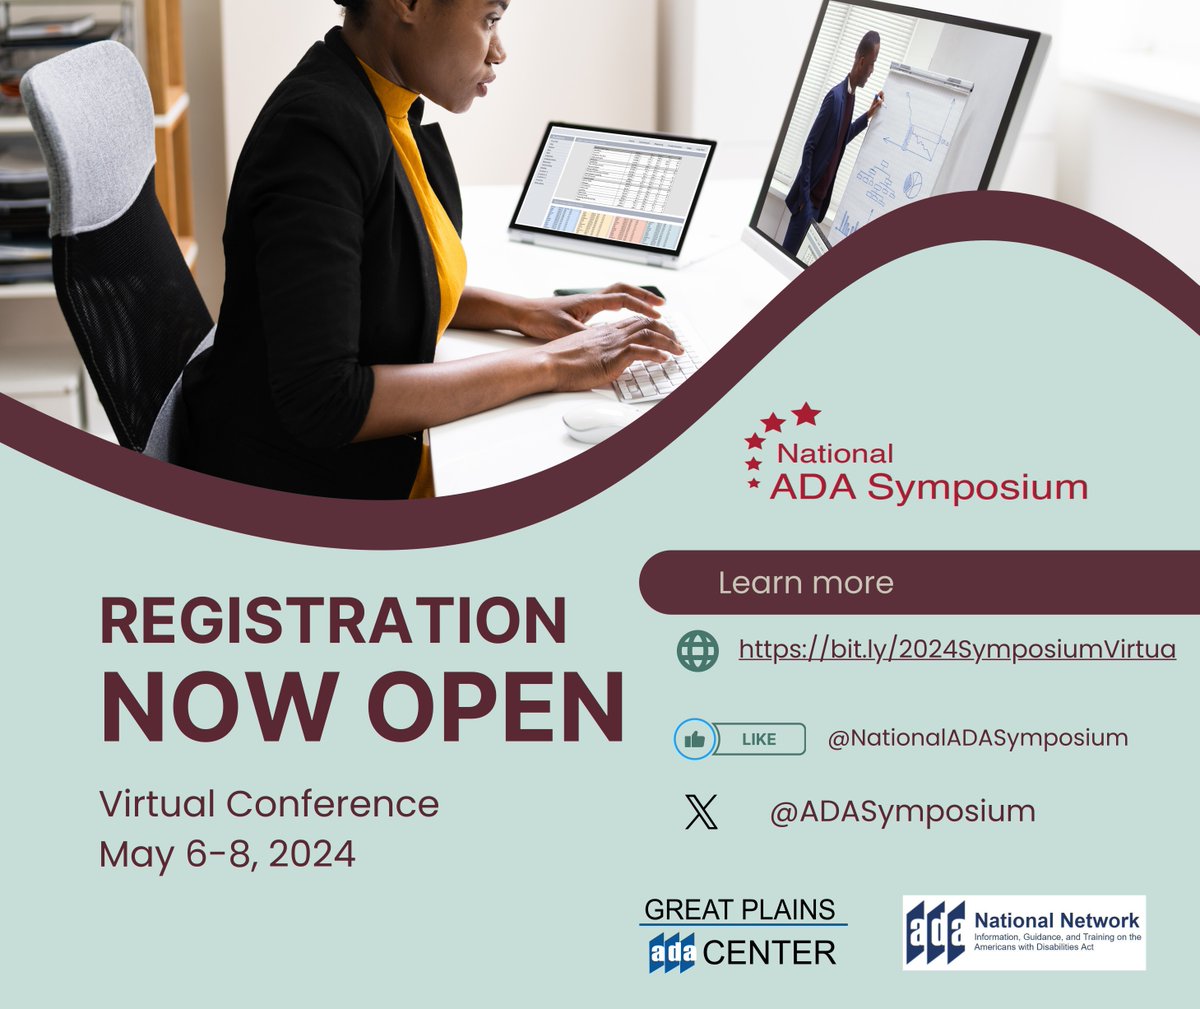 (1/2) This year's virtual National ADA Symposium is right around the corner! This conference is from May 6-8, 2024. This three-day training event offers 36 sessions covering all areas of the Americans with Disabilities Act (ADA) presented by nationally recognized experts.